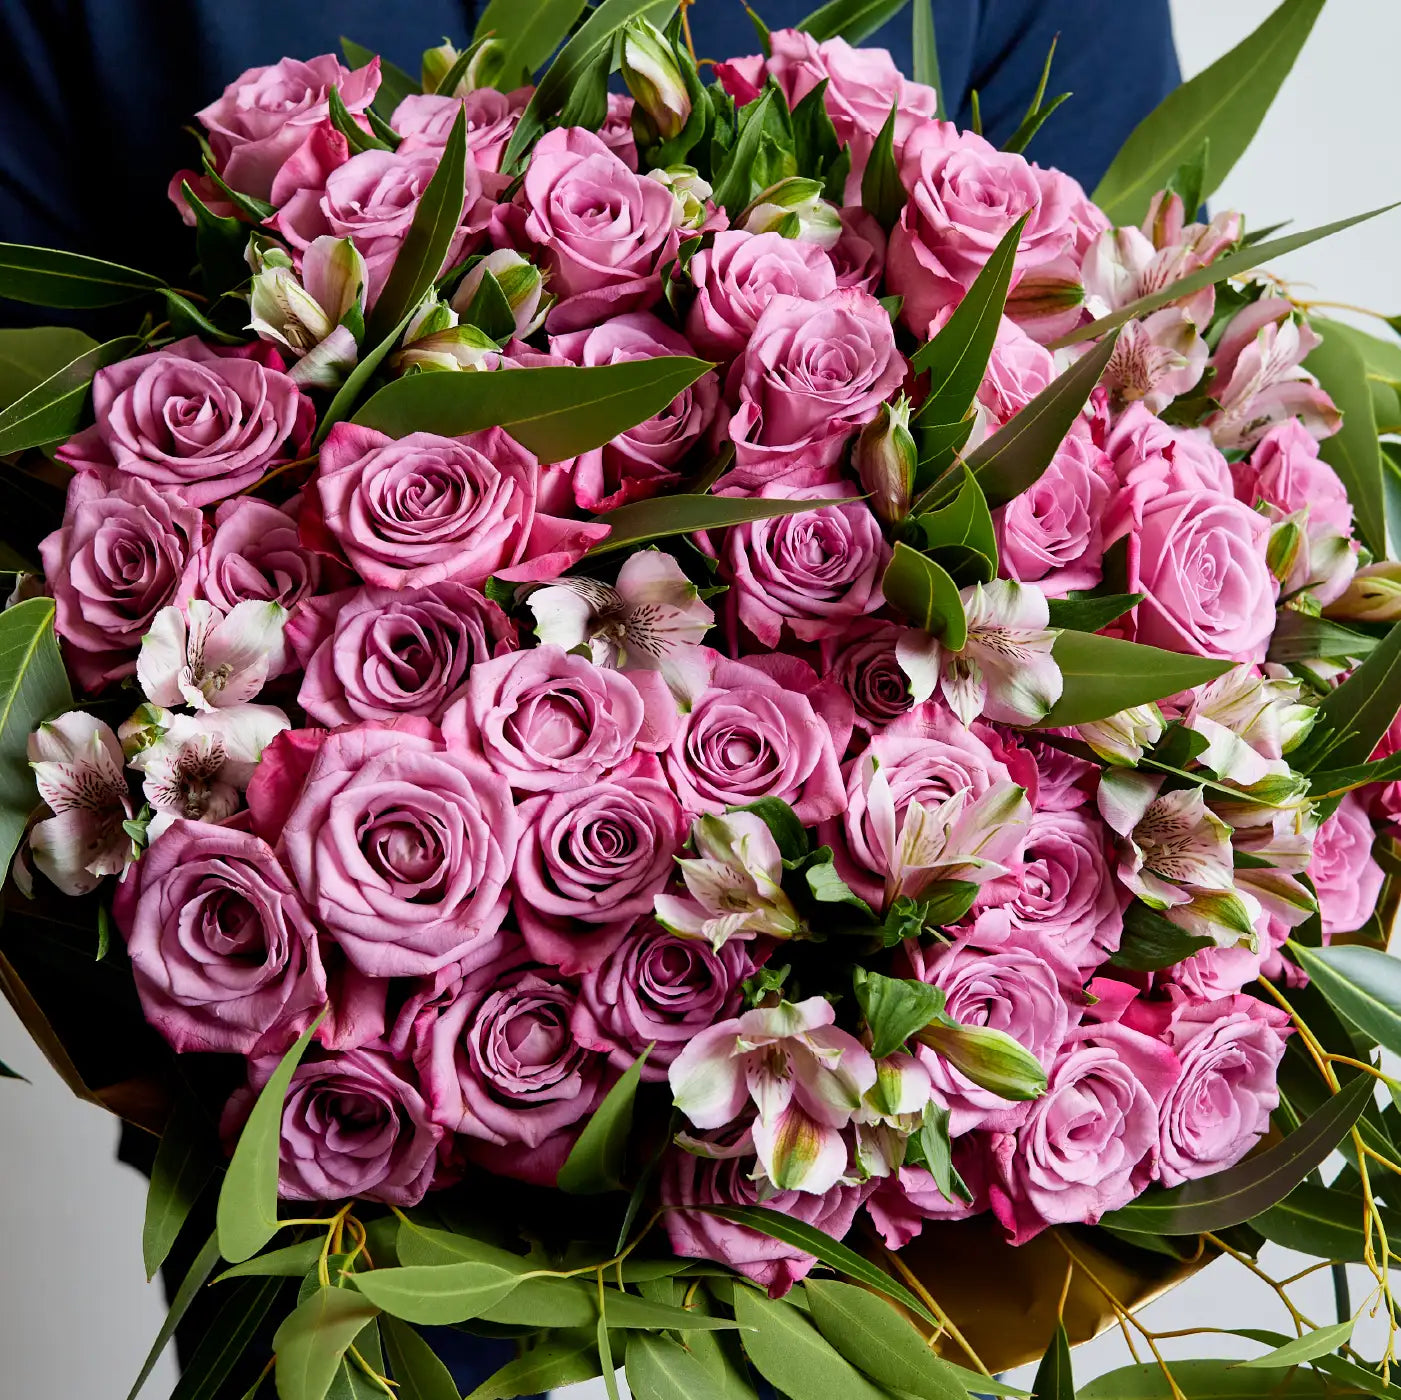 Close-up of a bouquet of pink and purple roses with greenery, highlighting Sustainable Practices. Text explains eco-friendly practices such as water recycling and organic pest control. Our Difference. Fabulous Flowers and Gifts.